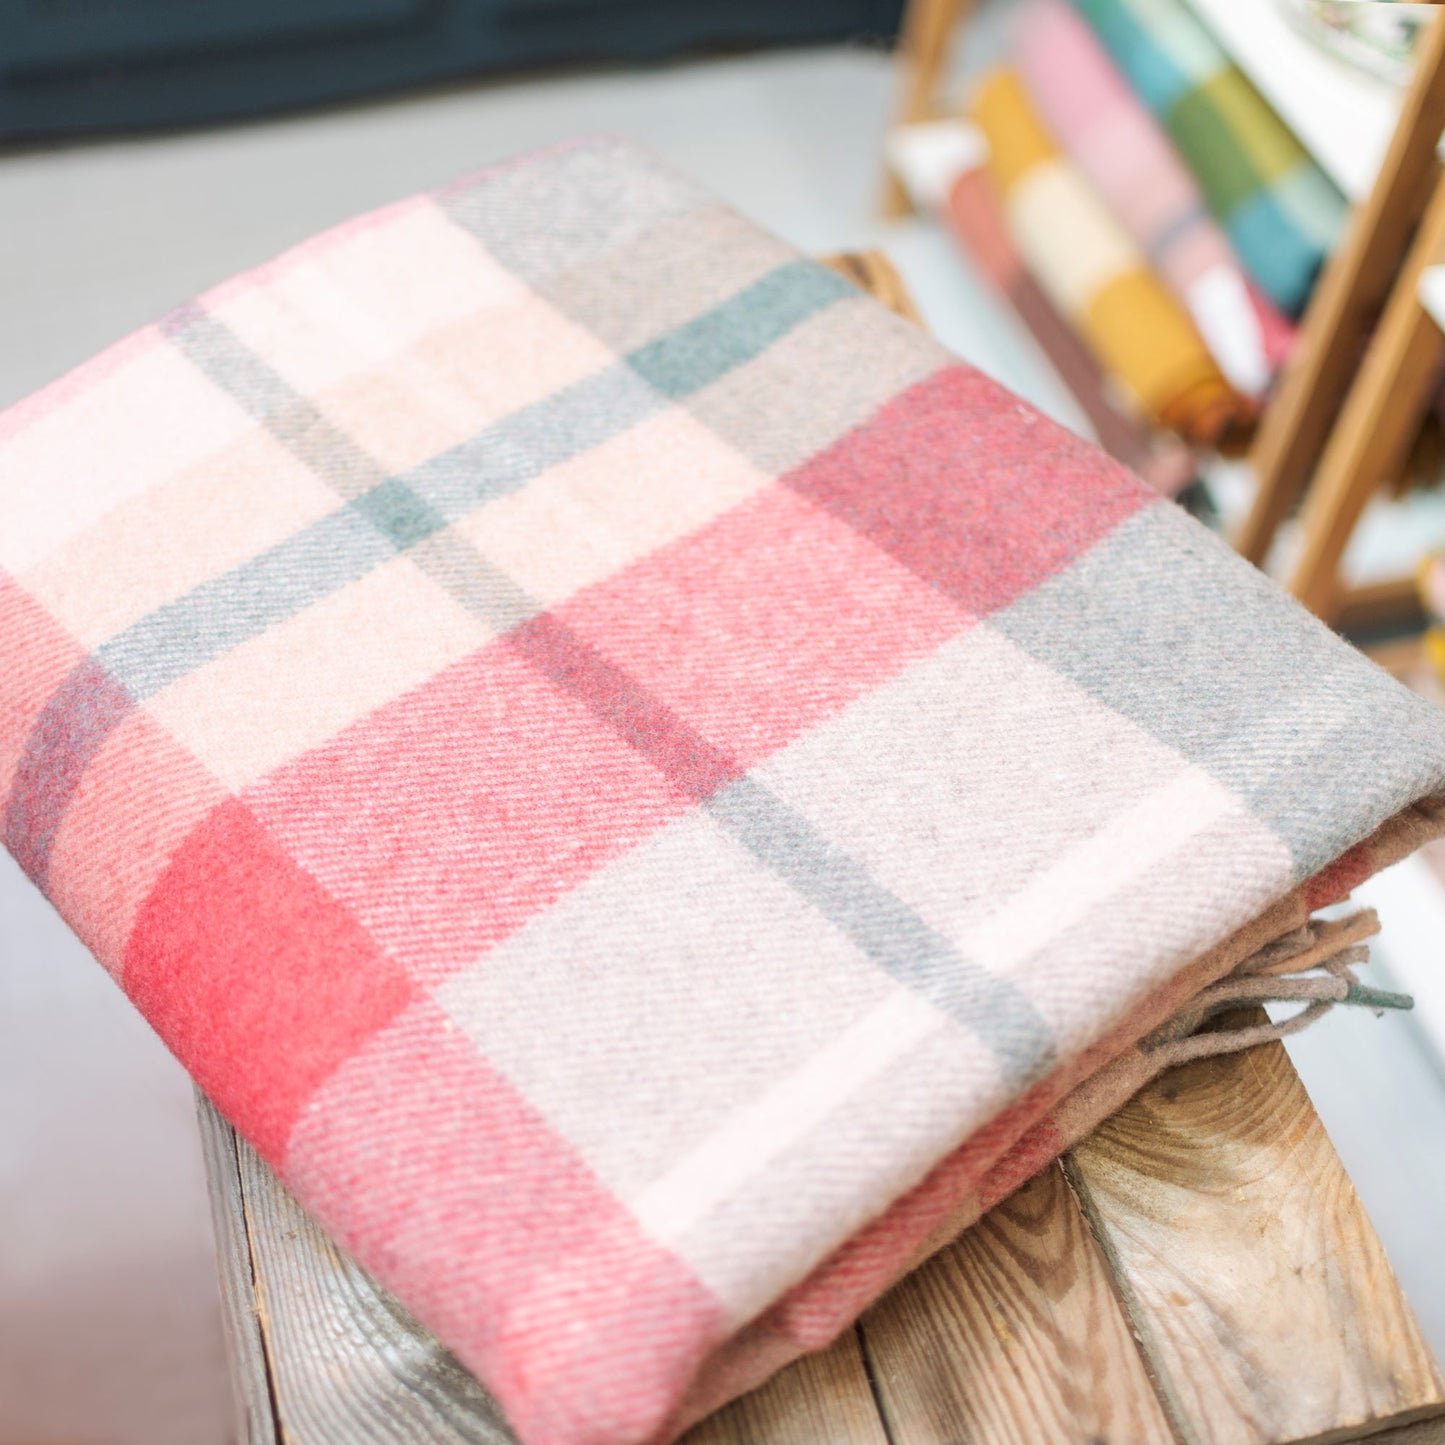 Recycled Wool Blanket in Pink Patchwork Check - The Bristol Artisan Handmade Sustainable Gifts and Homewares.